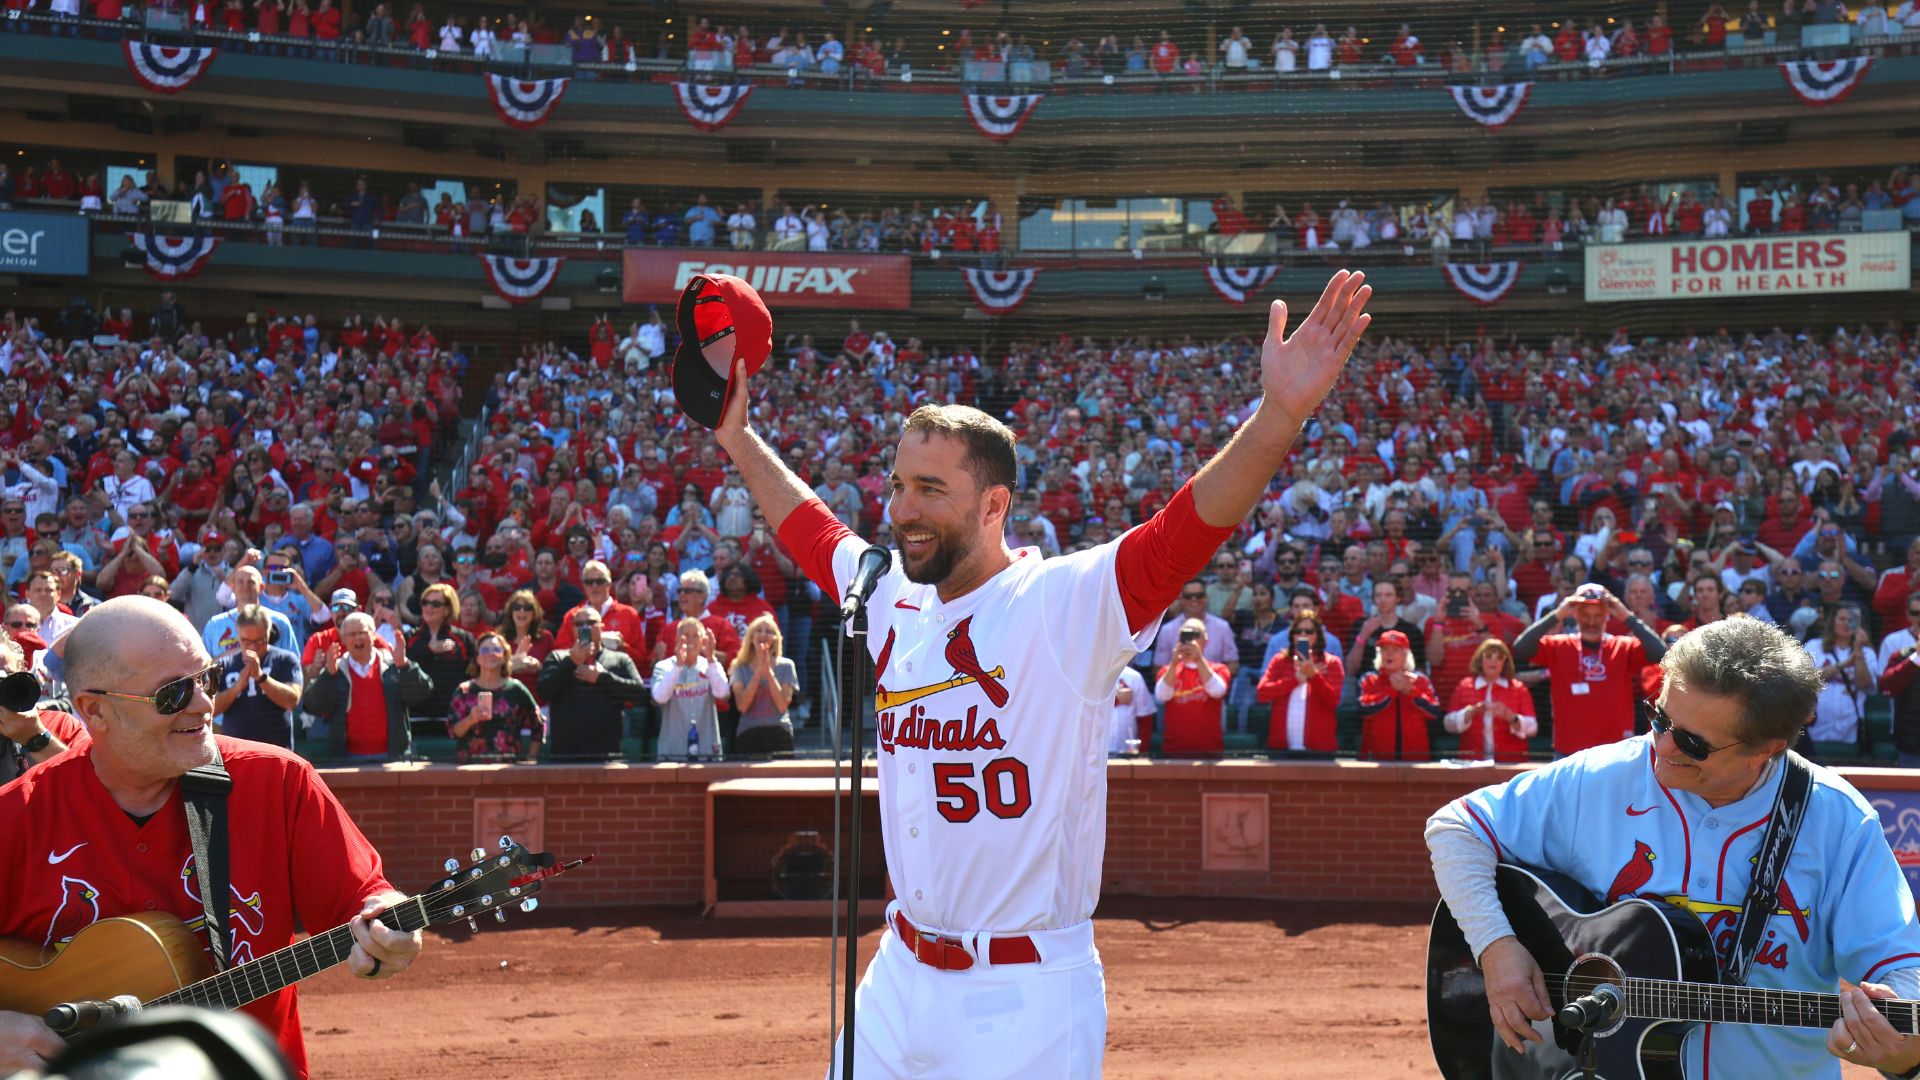 WATCH: St. Louis Pitcher Sings National Anthem On Opening Day